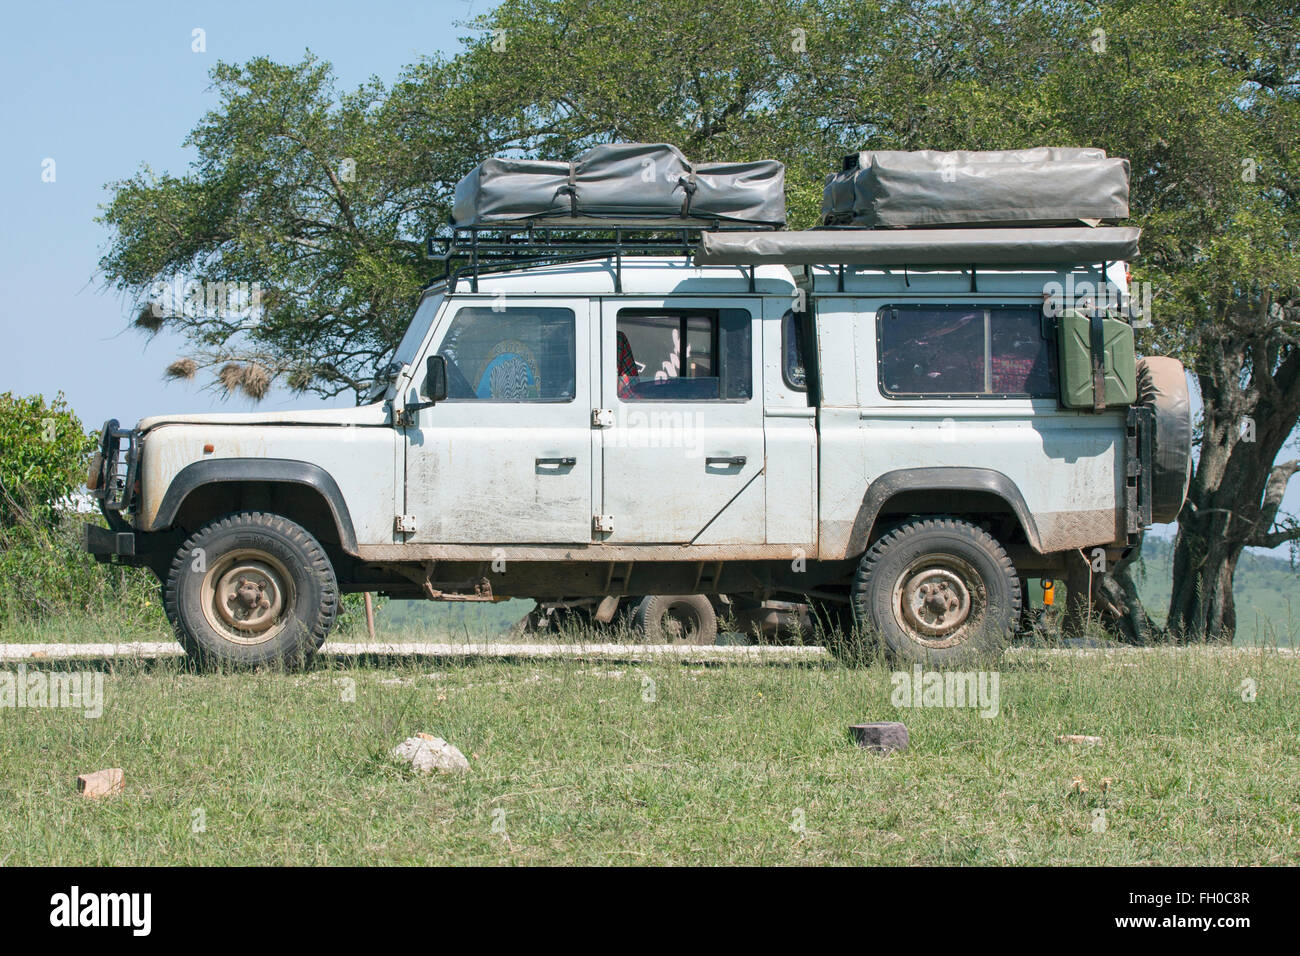 Old Land Rover Defender 110 with two roof tents Parked at roadside